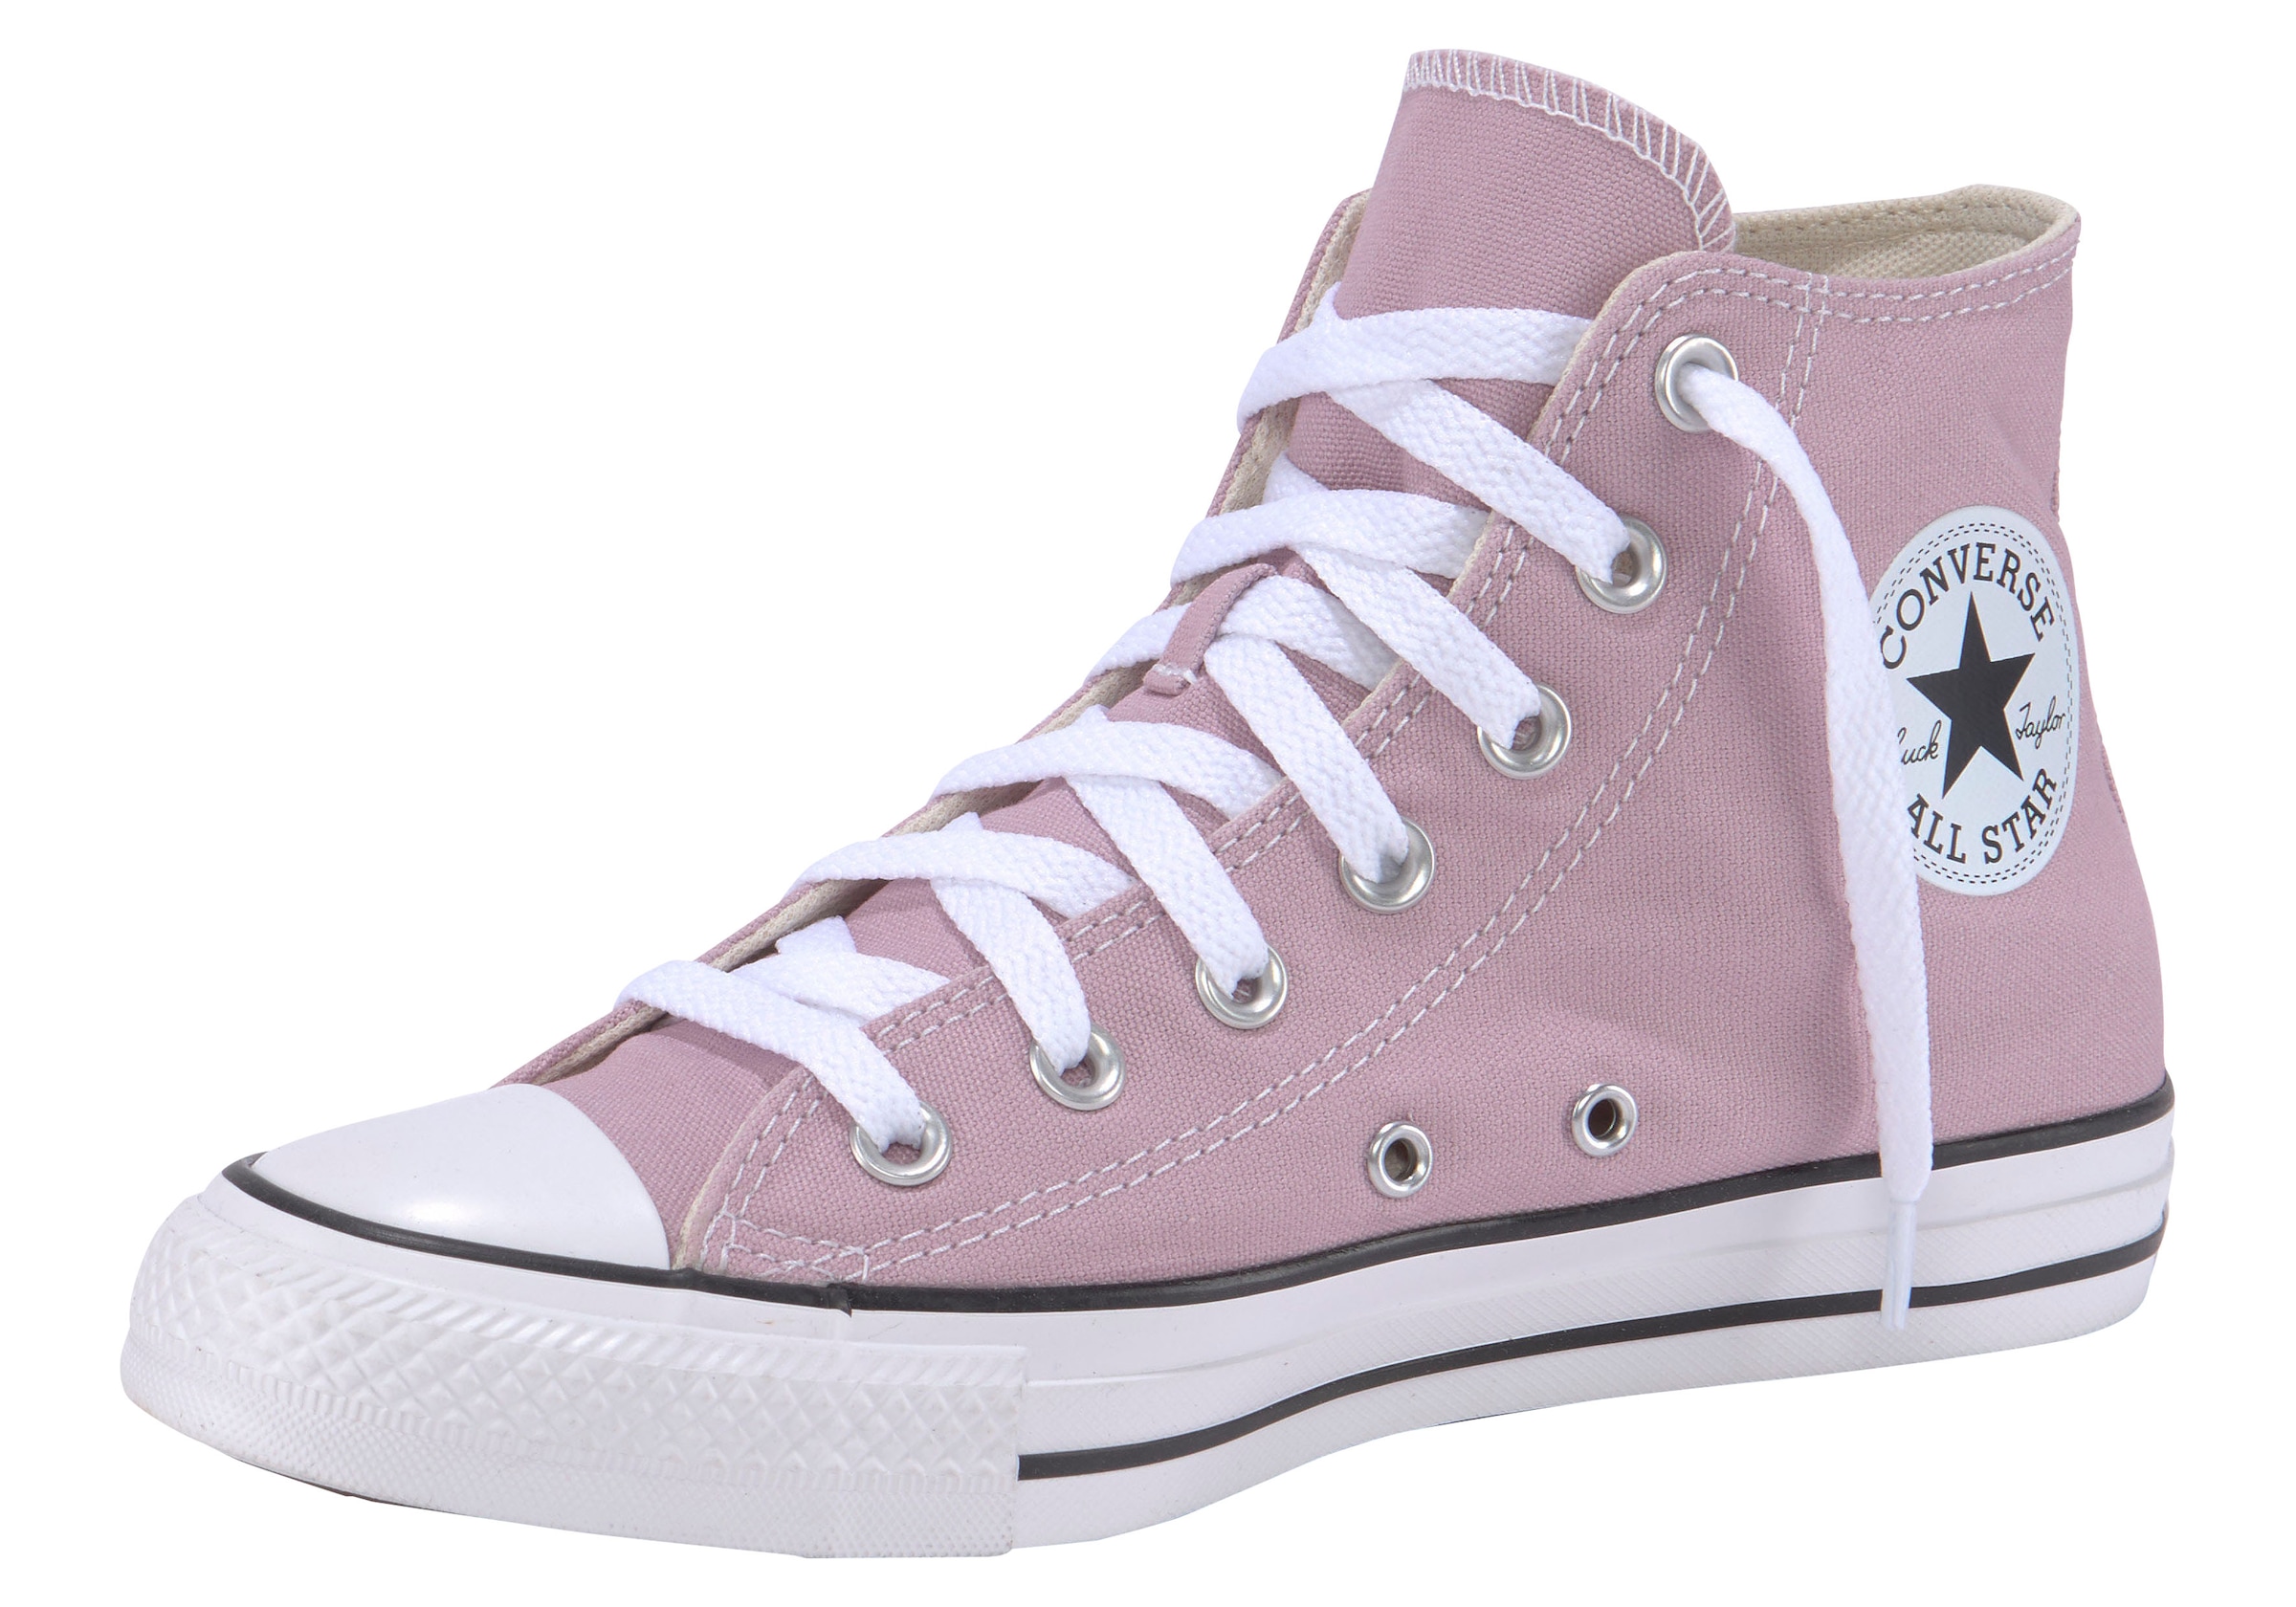 Converse Sneaker »CHUCK TAYLOR ALL STAR FALL TO...